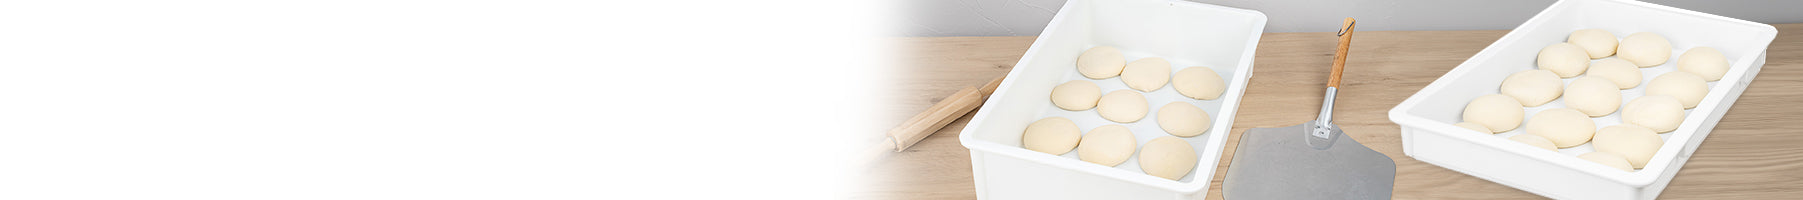 Banner_Smallwares_Pizza-Tools_Pizza-Dough-Proofing-Boxes_414